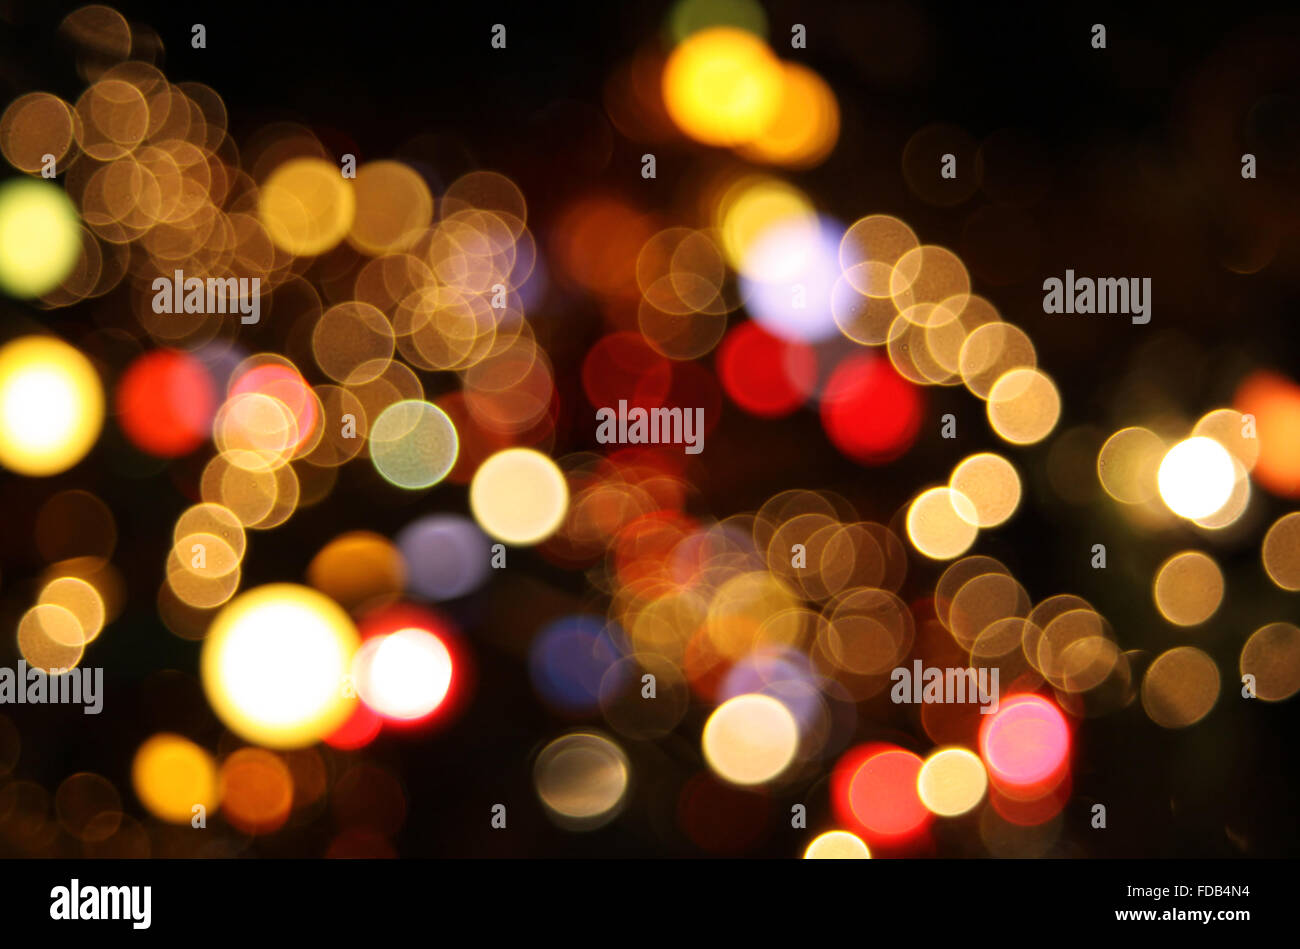 Bokeh Abstract background Banque D'Images